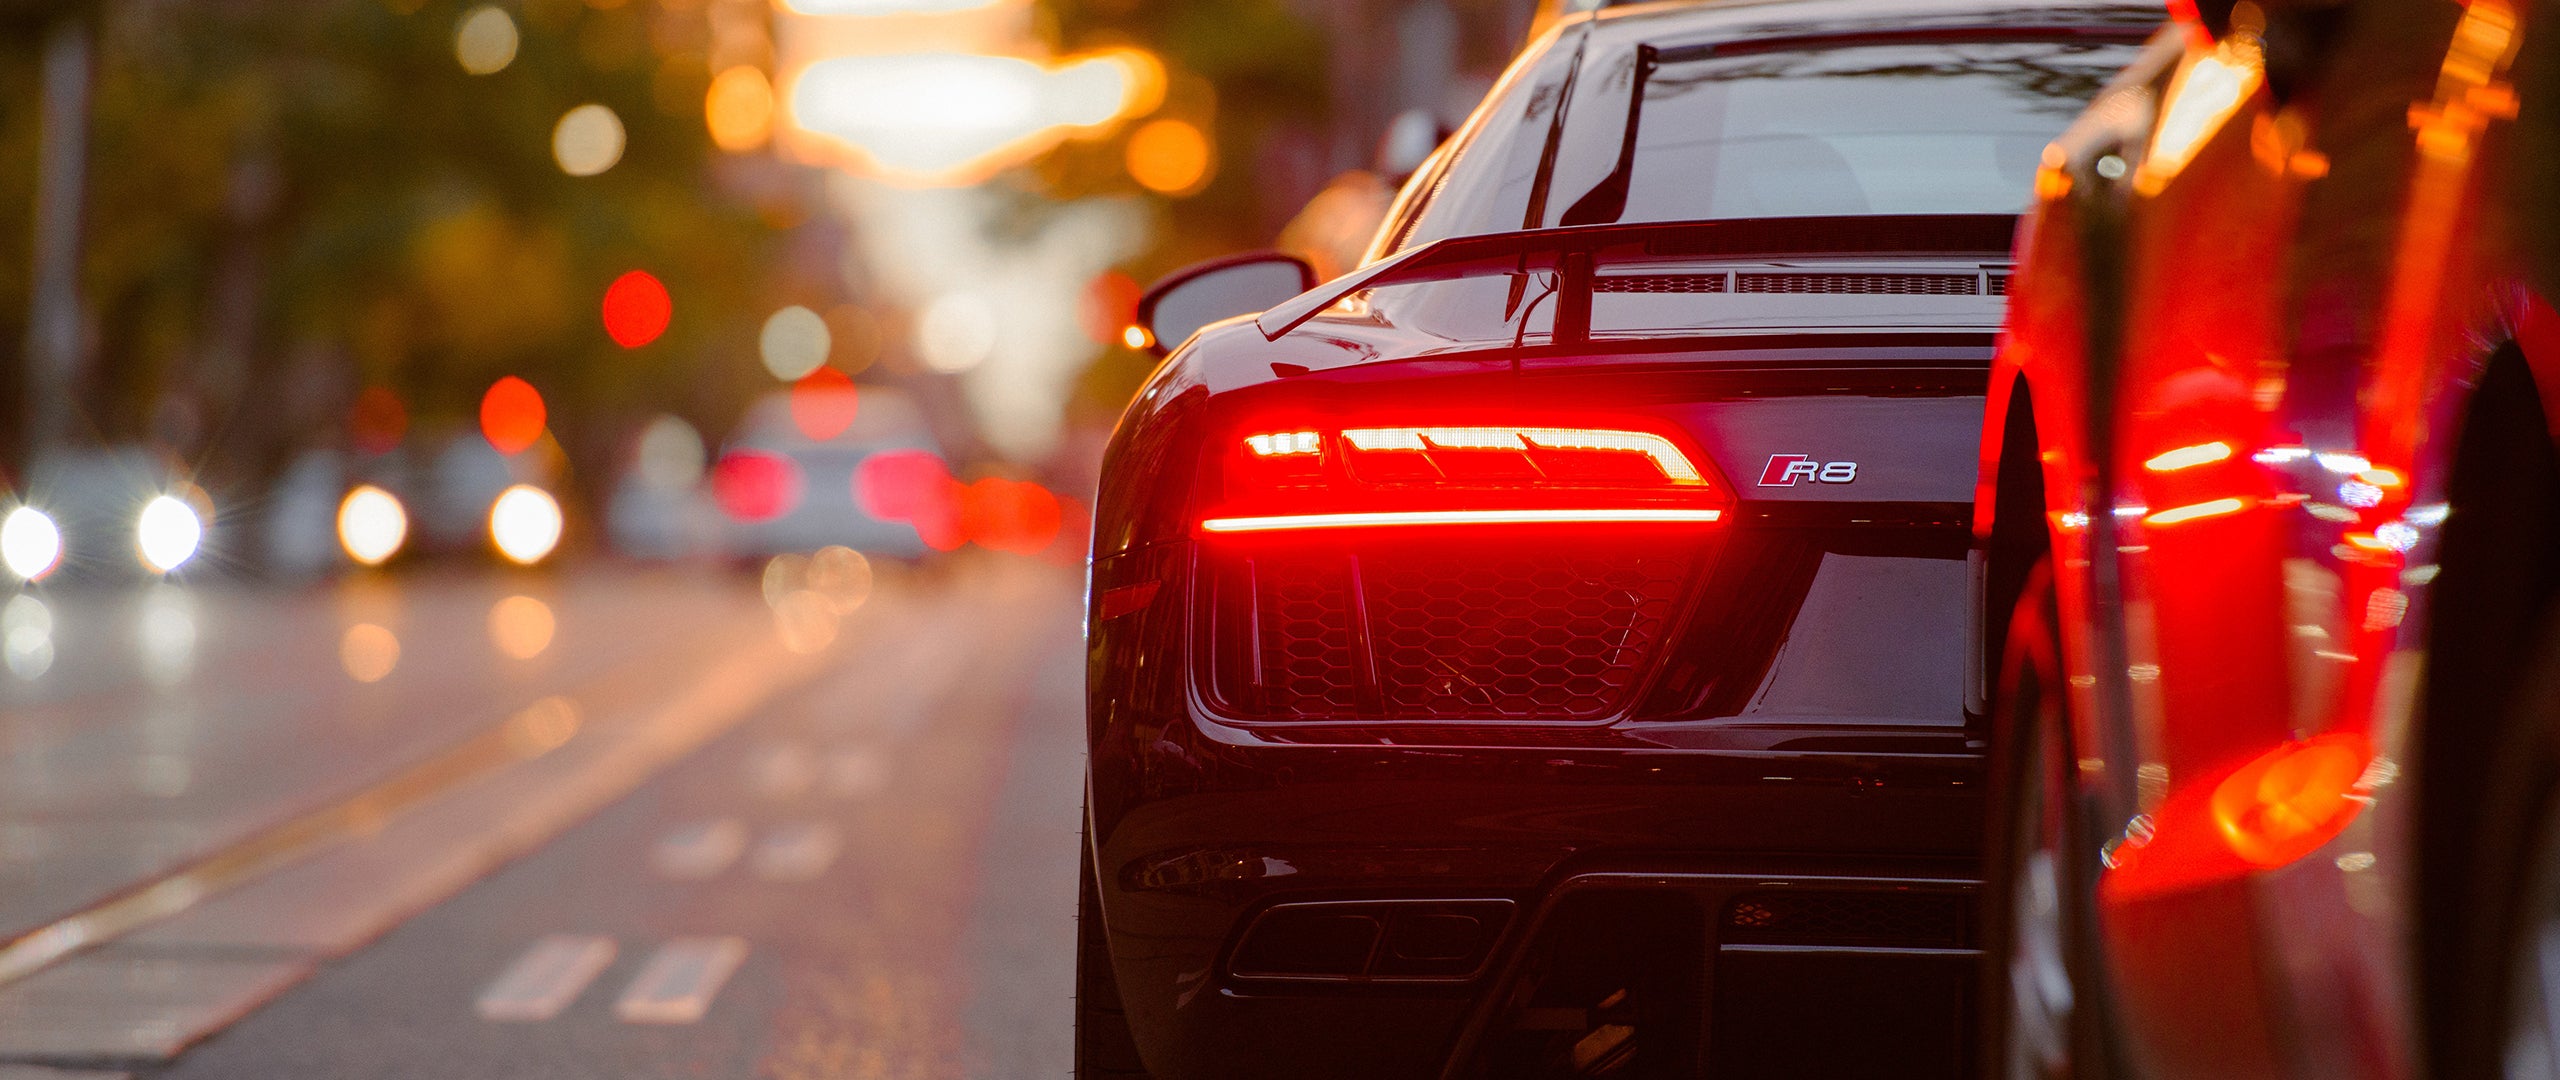 Audi R8 rear view with light on